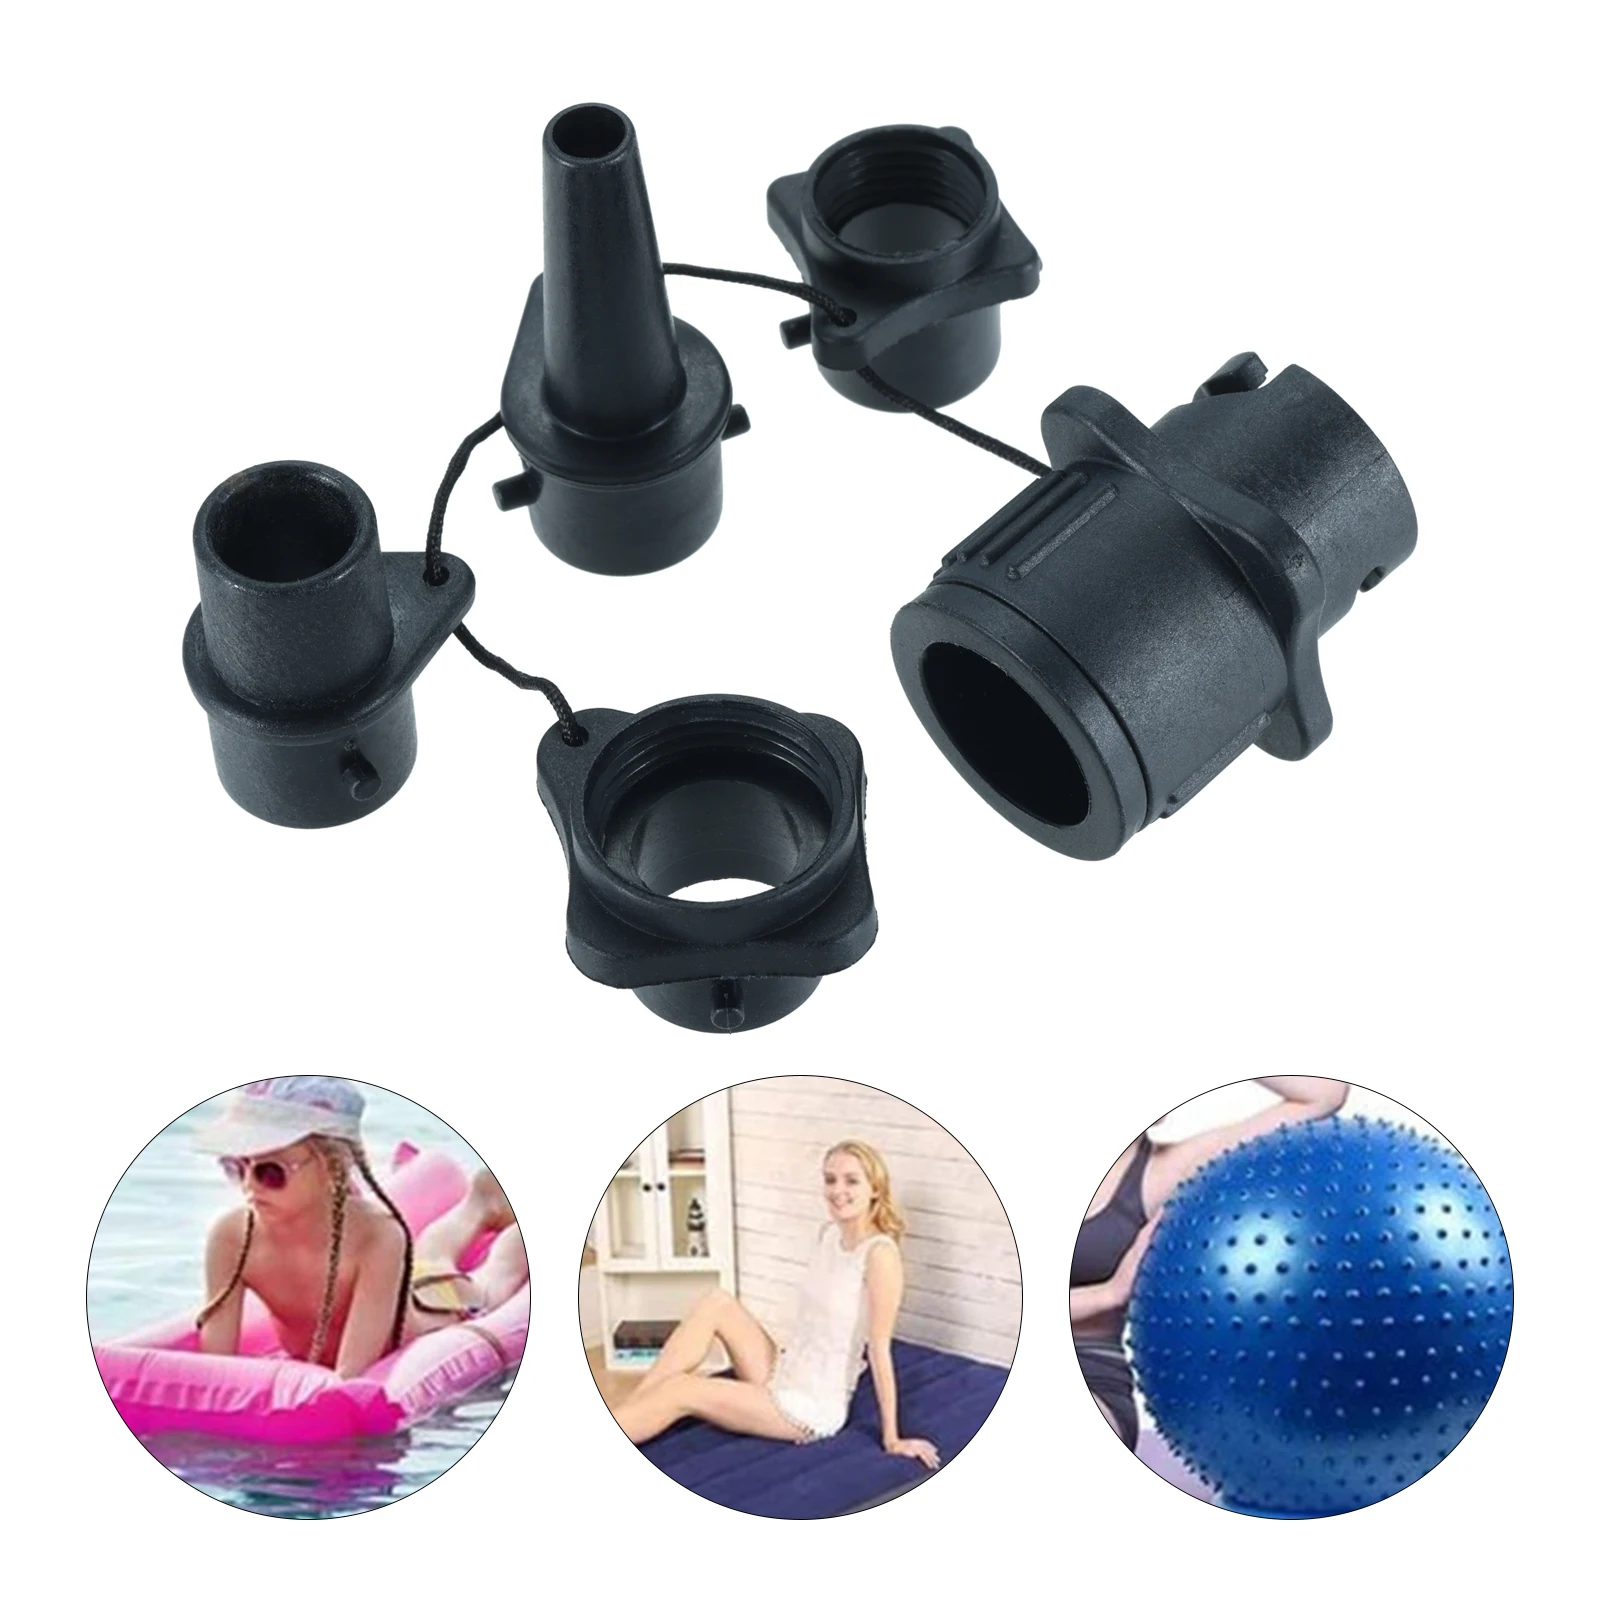 1 Set Air Valve Nozzle Adapter Kit Black Plastic Multi-Function Hose Connector Surf Paddle Board Canoe Inflatable Boat Accessory adapter plastic attachments connecting vacuum cleaner hose converter parts accessory for 32mm to 35mm 32 35mm practical